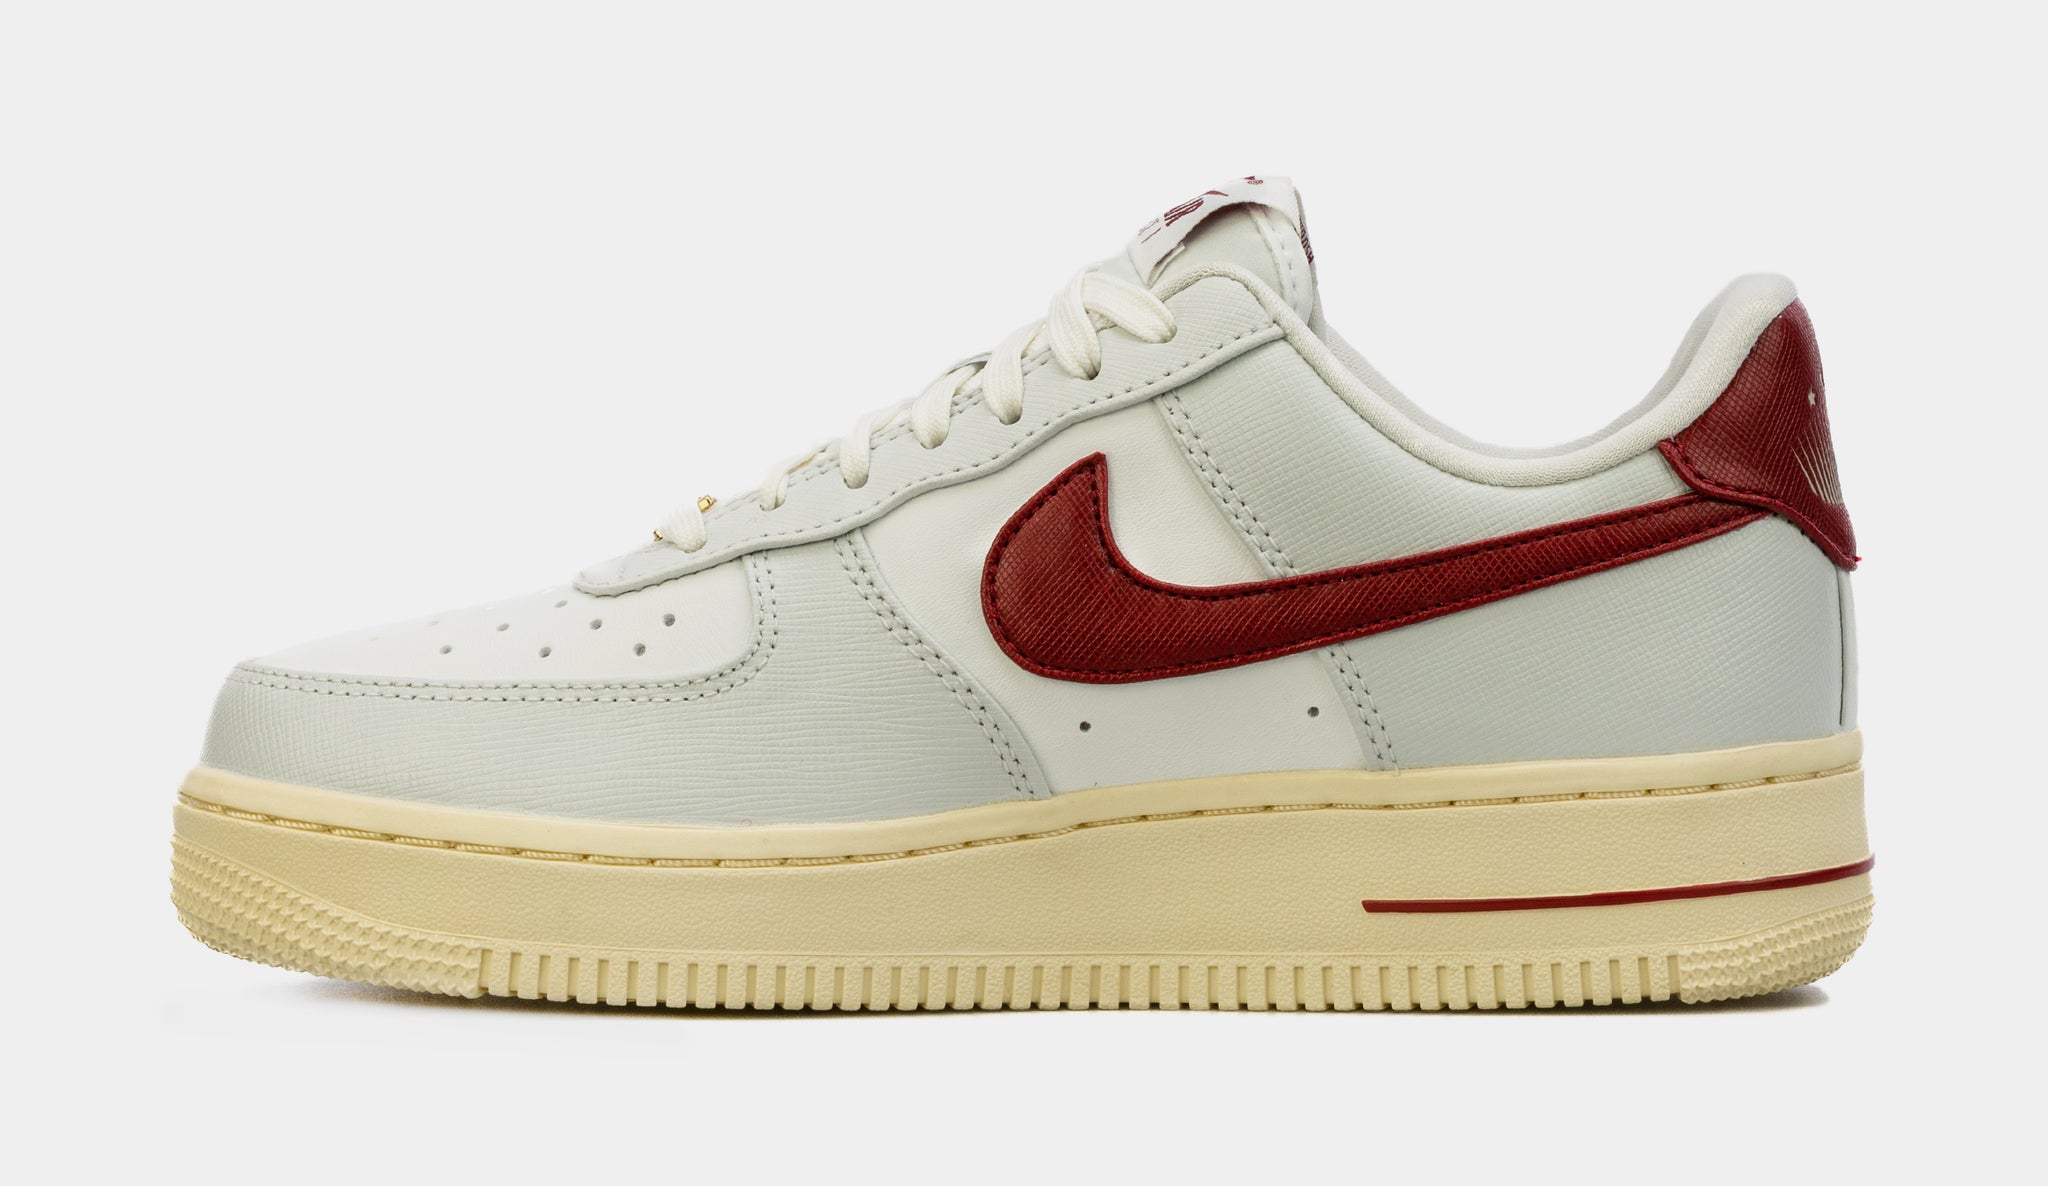 Red Air Force 1 Shoes. Nike IN